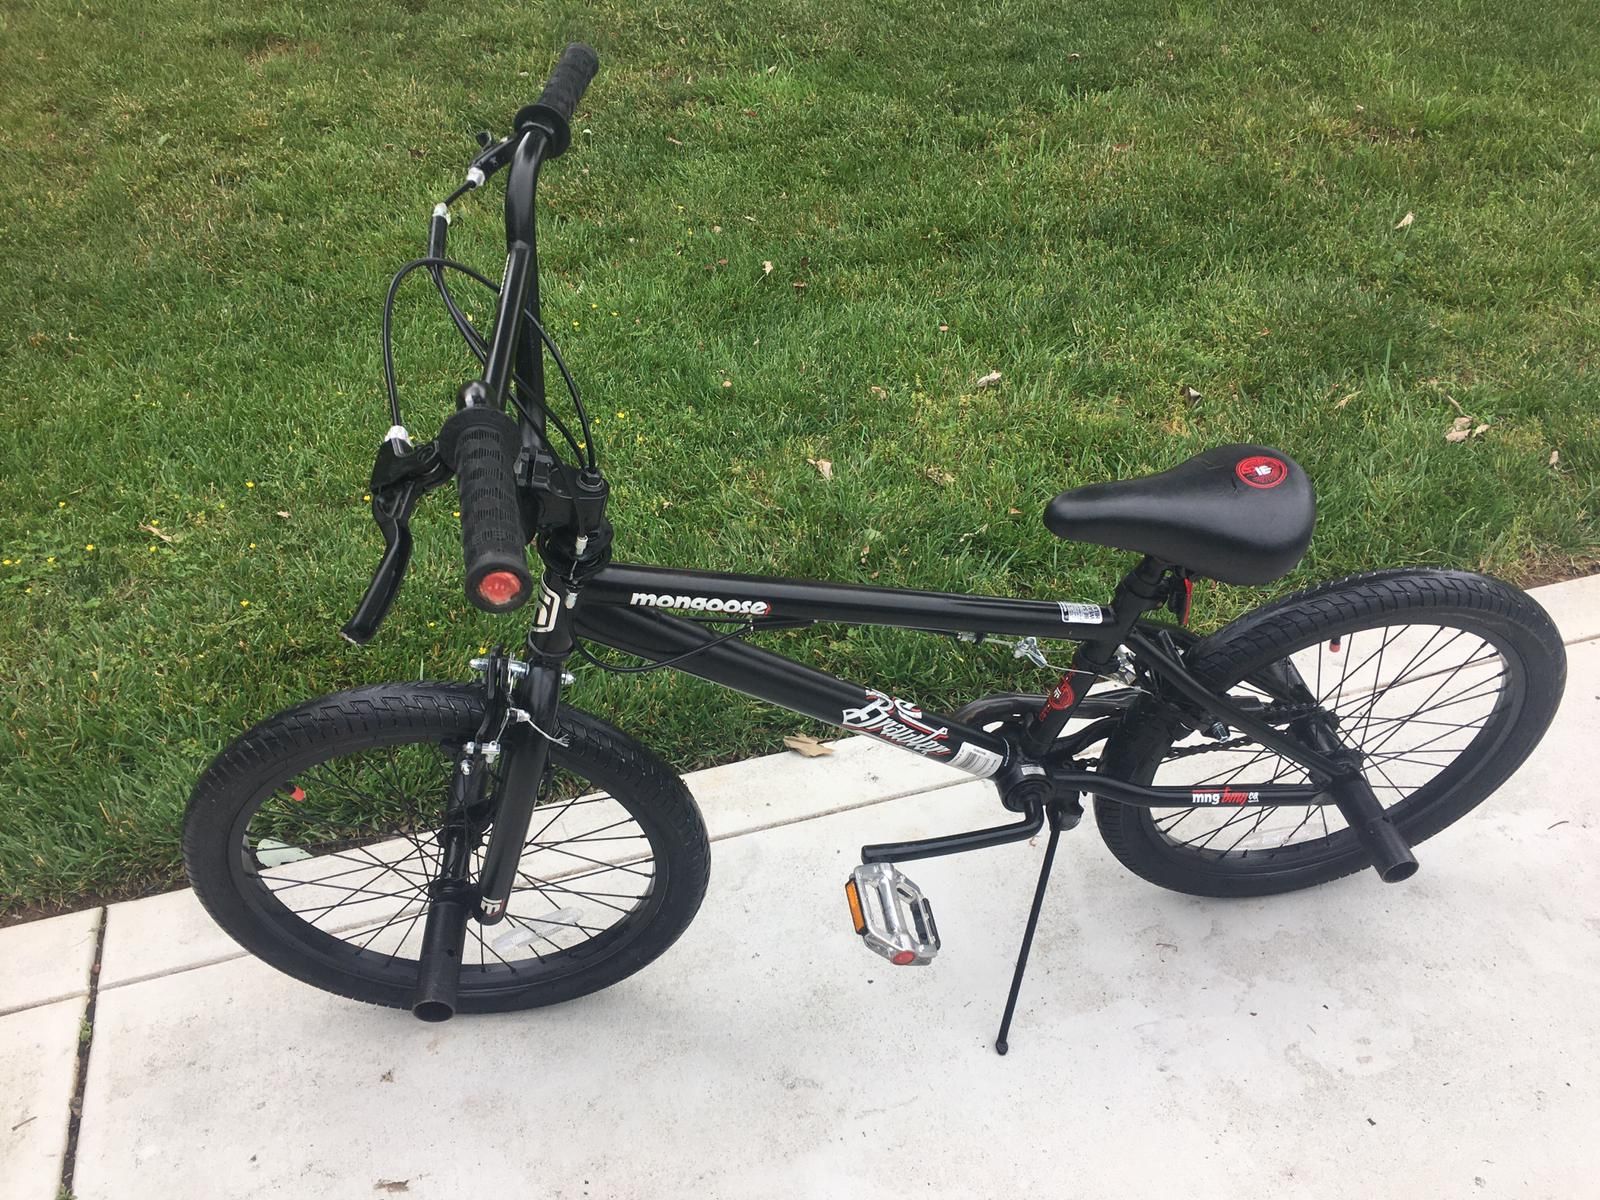 20” boys BMX bike in great condition